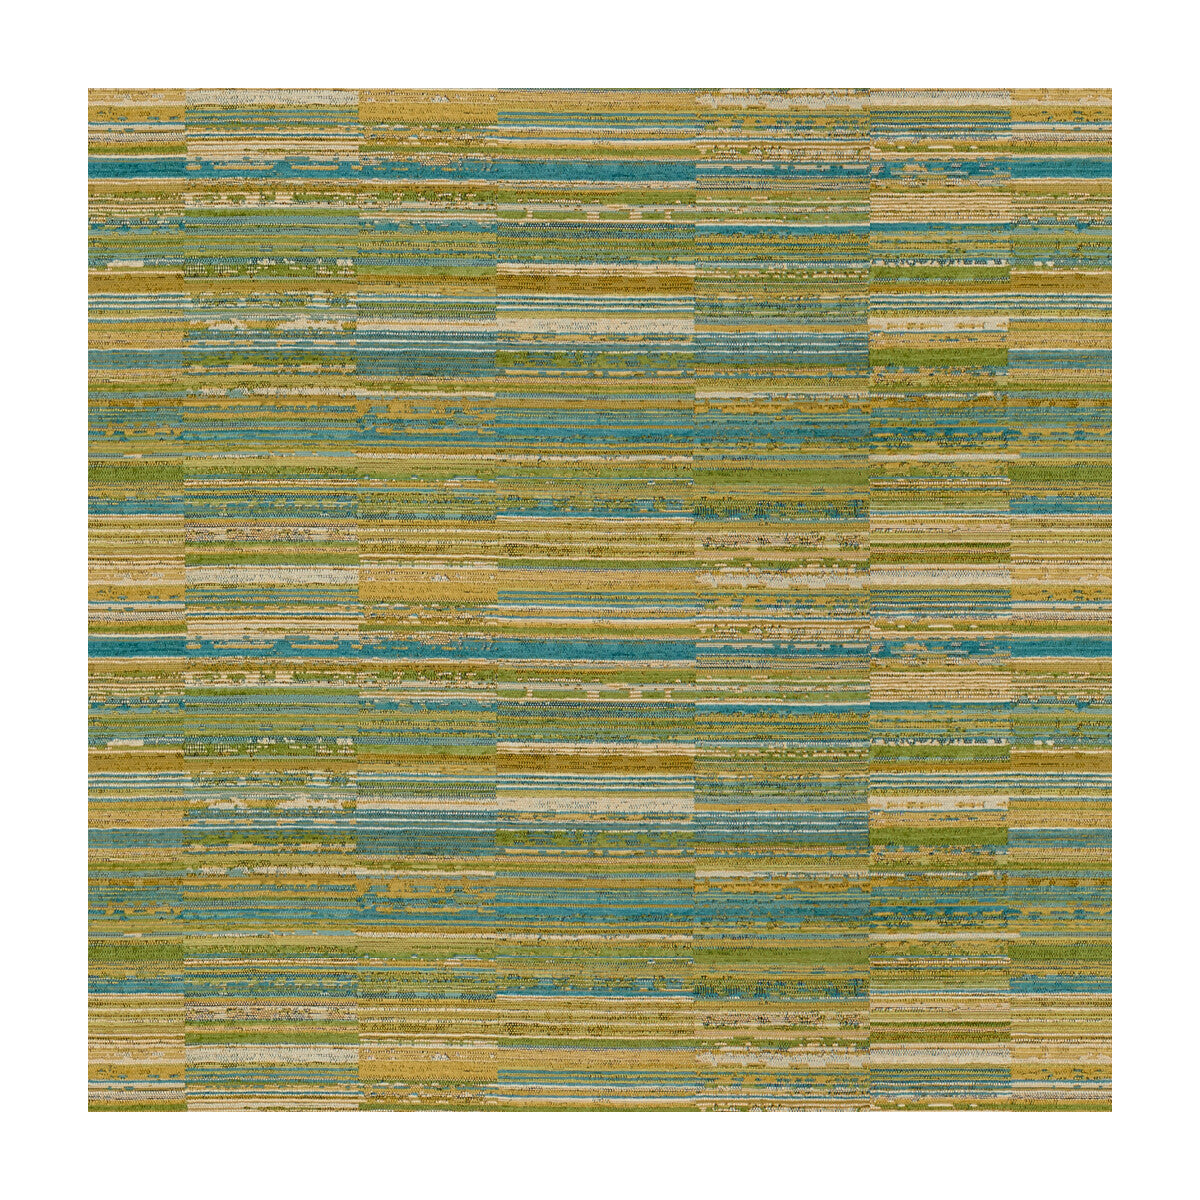 Rafiki fabric in african sky color - pattern 33867.523.0 - by Kravet Contract in the Tanzania J Banks collection